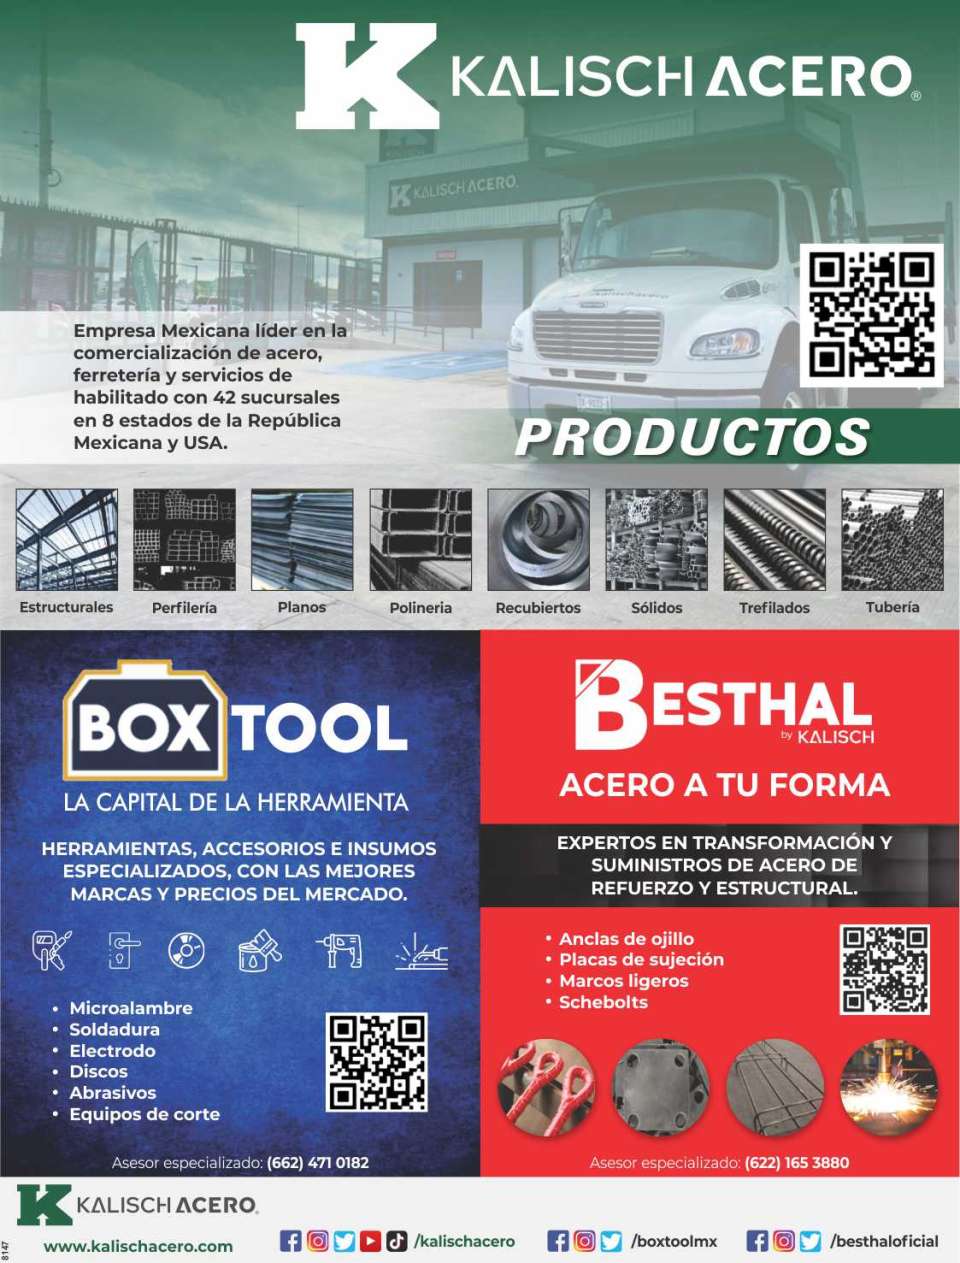 Leading Mexican company in the commercialization of steel, hardware and qualified services, with its divisions Boxtool y Besthal